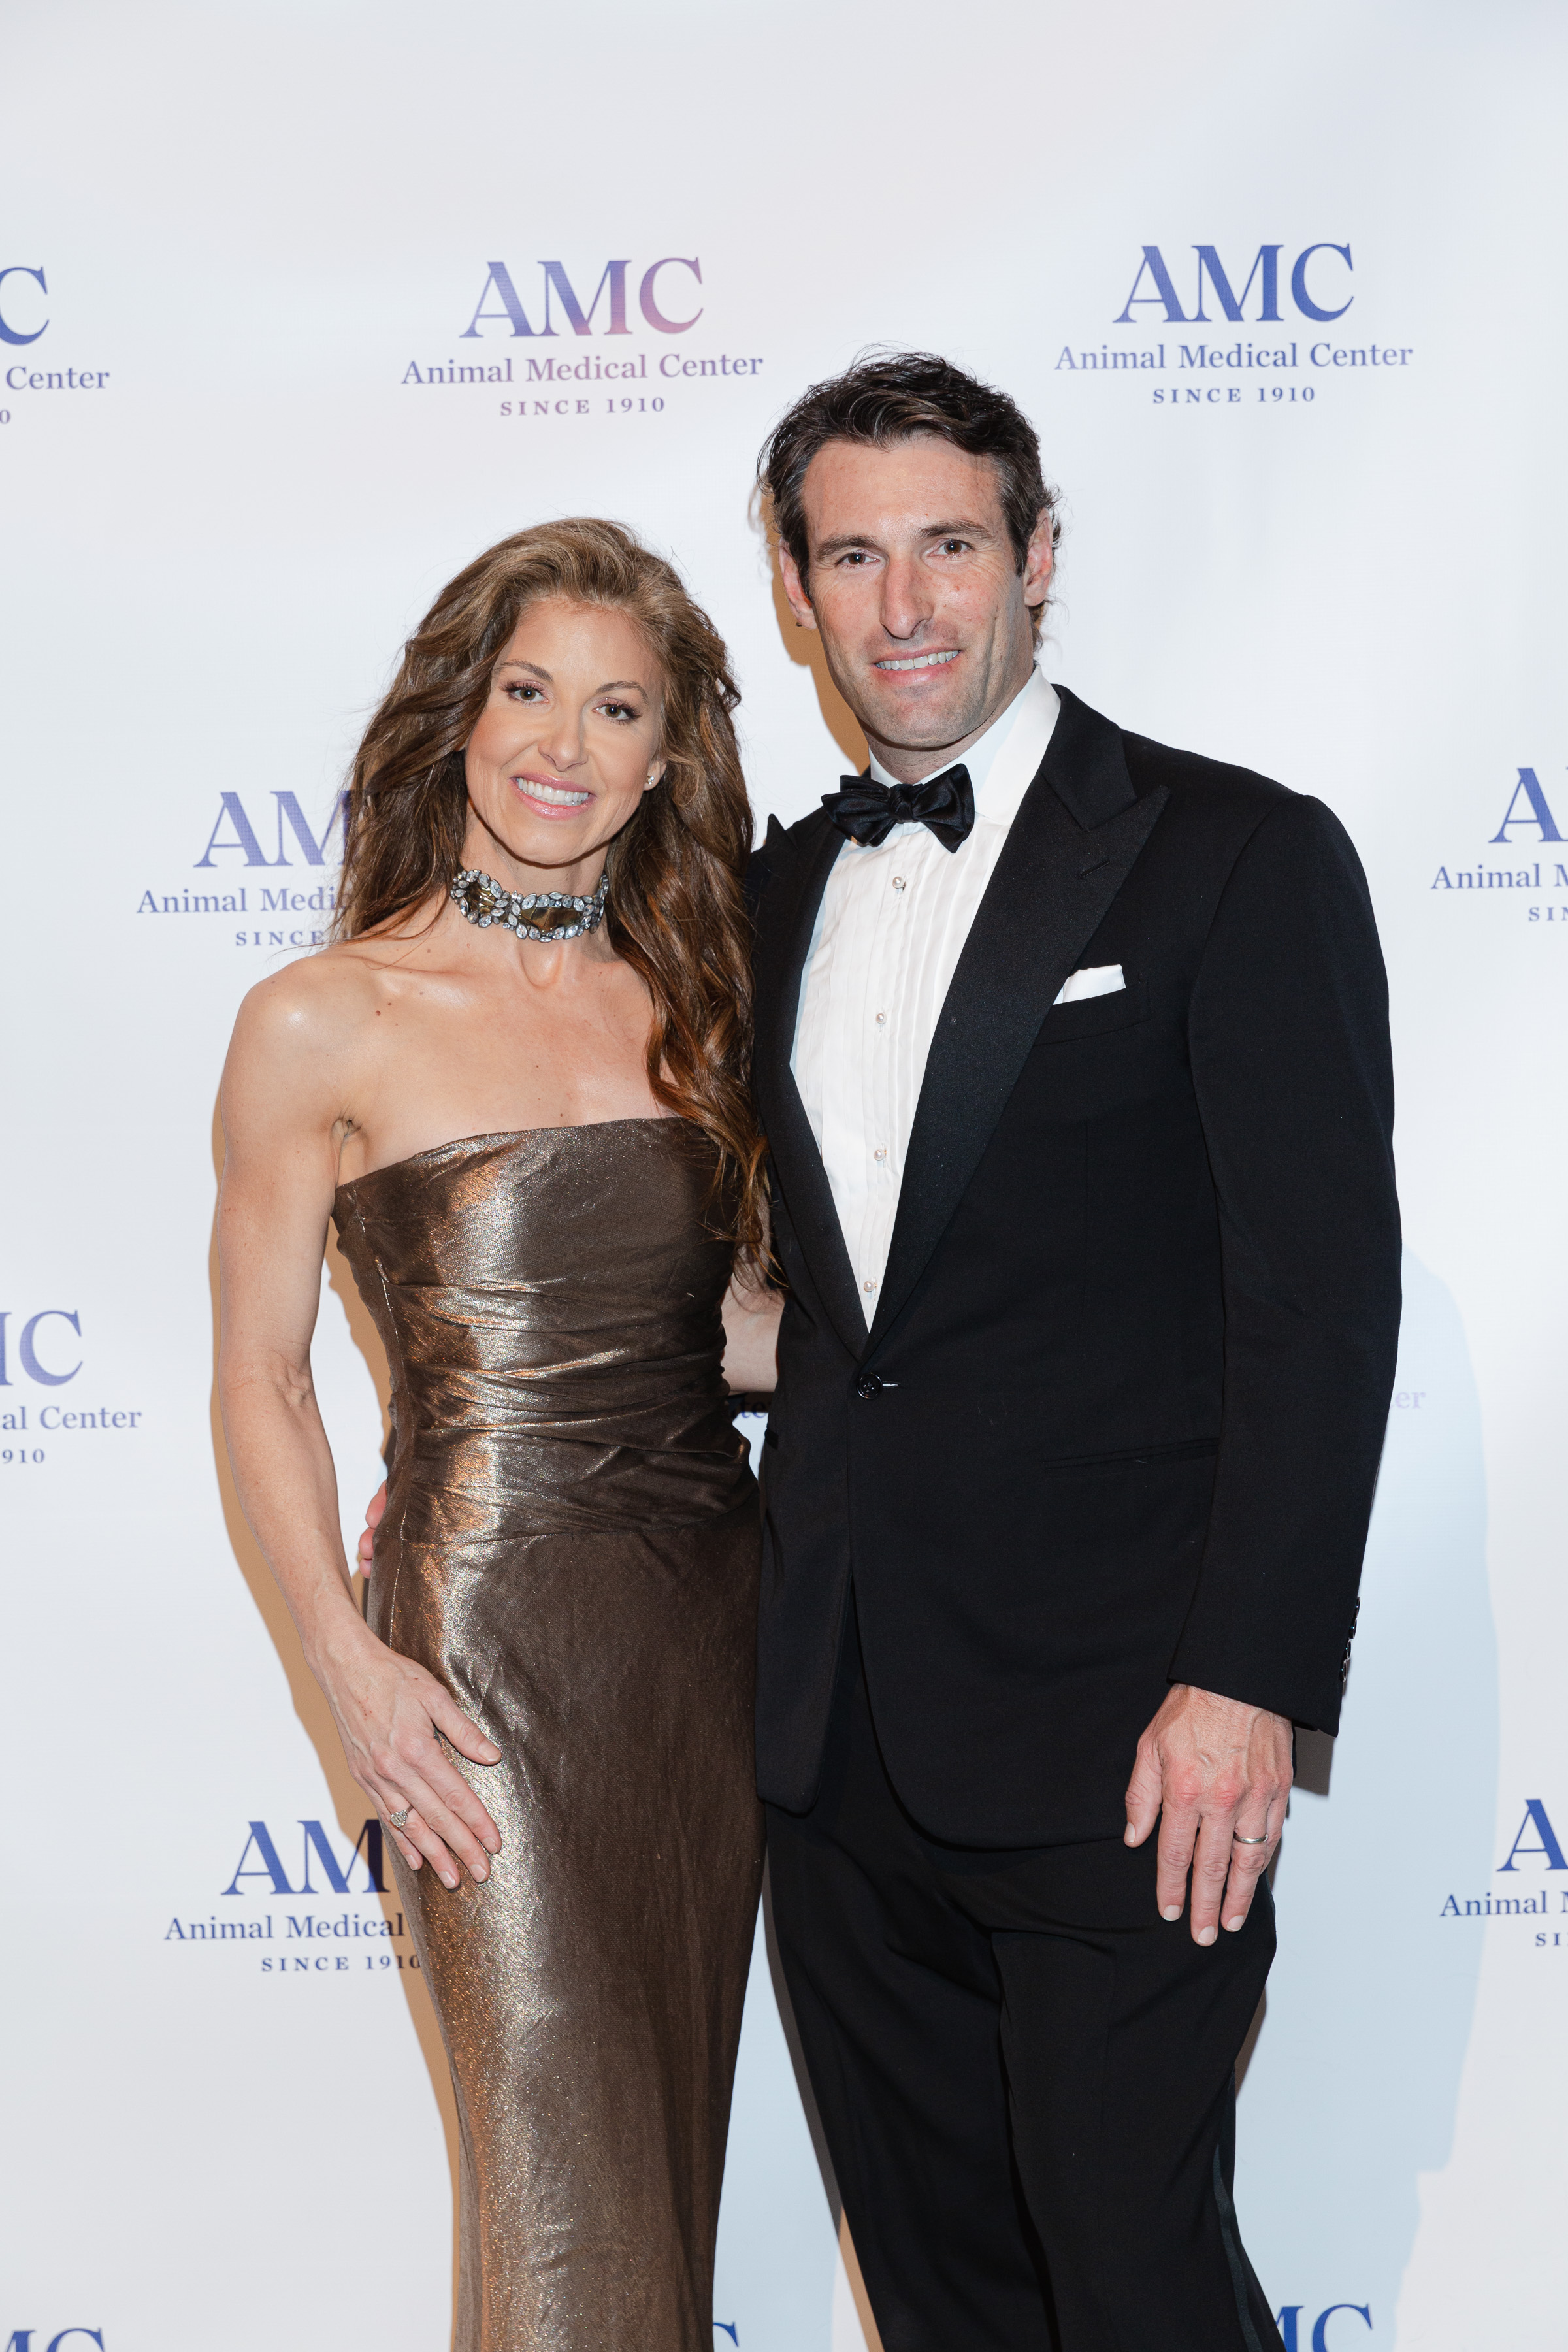 Dylan Lauren poses with her husband in front of an AMC backdrop